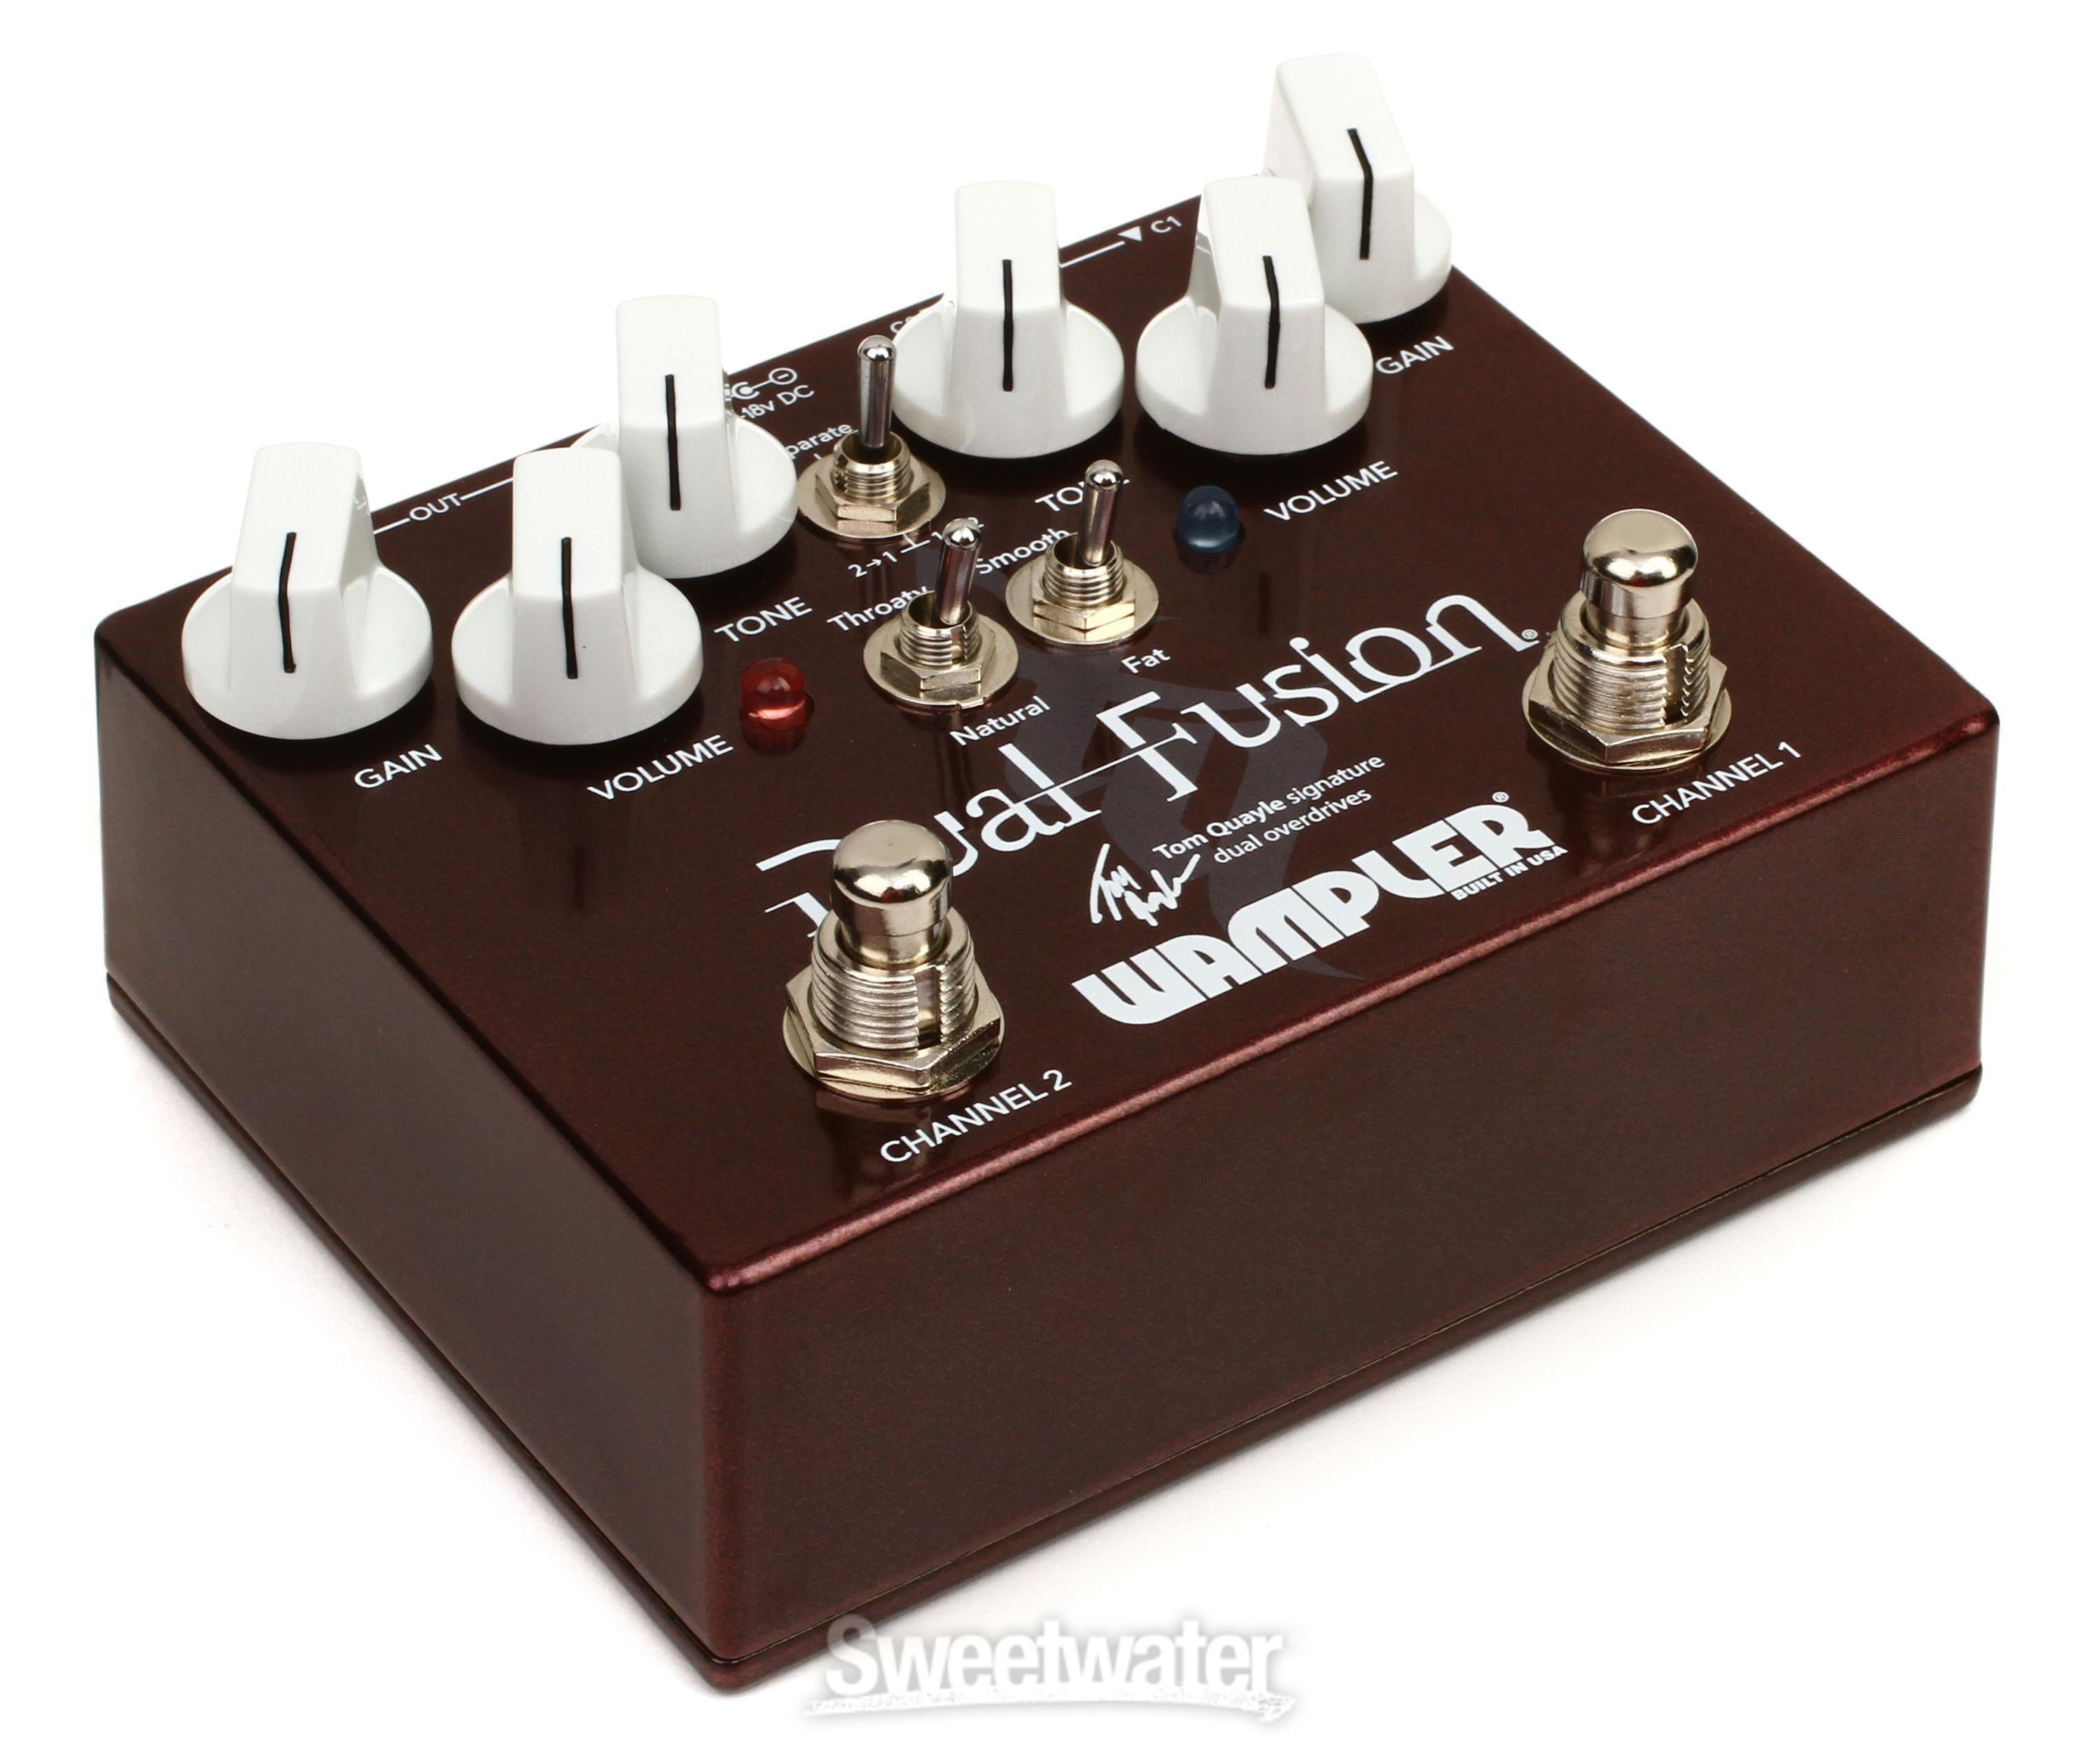 Wampler Tom Quayle Dual Fusion Overdrive Pedal Reviews | Sweetwater